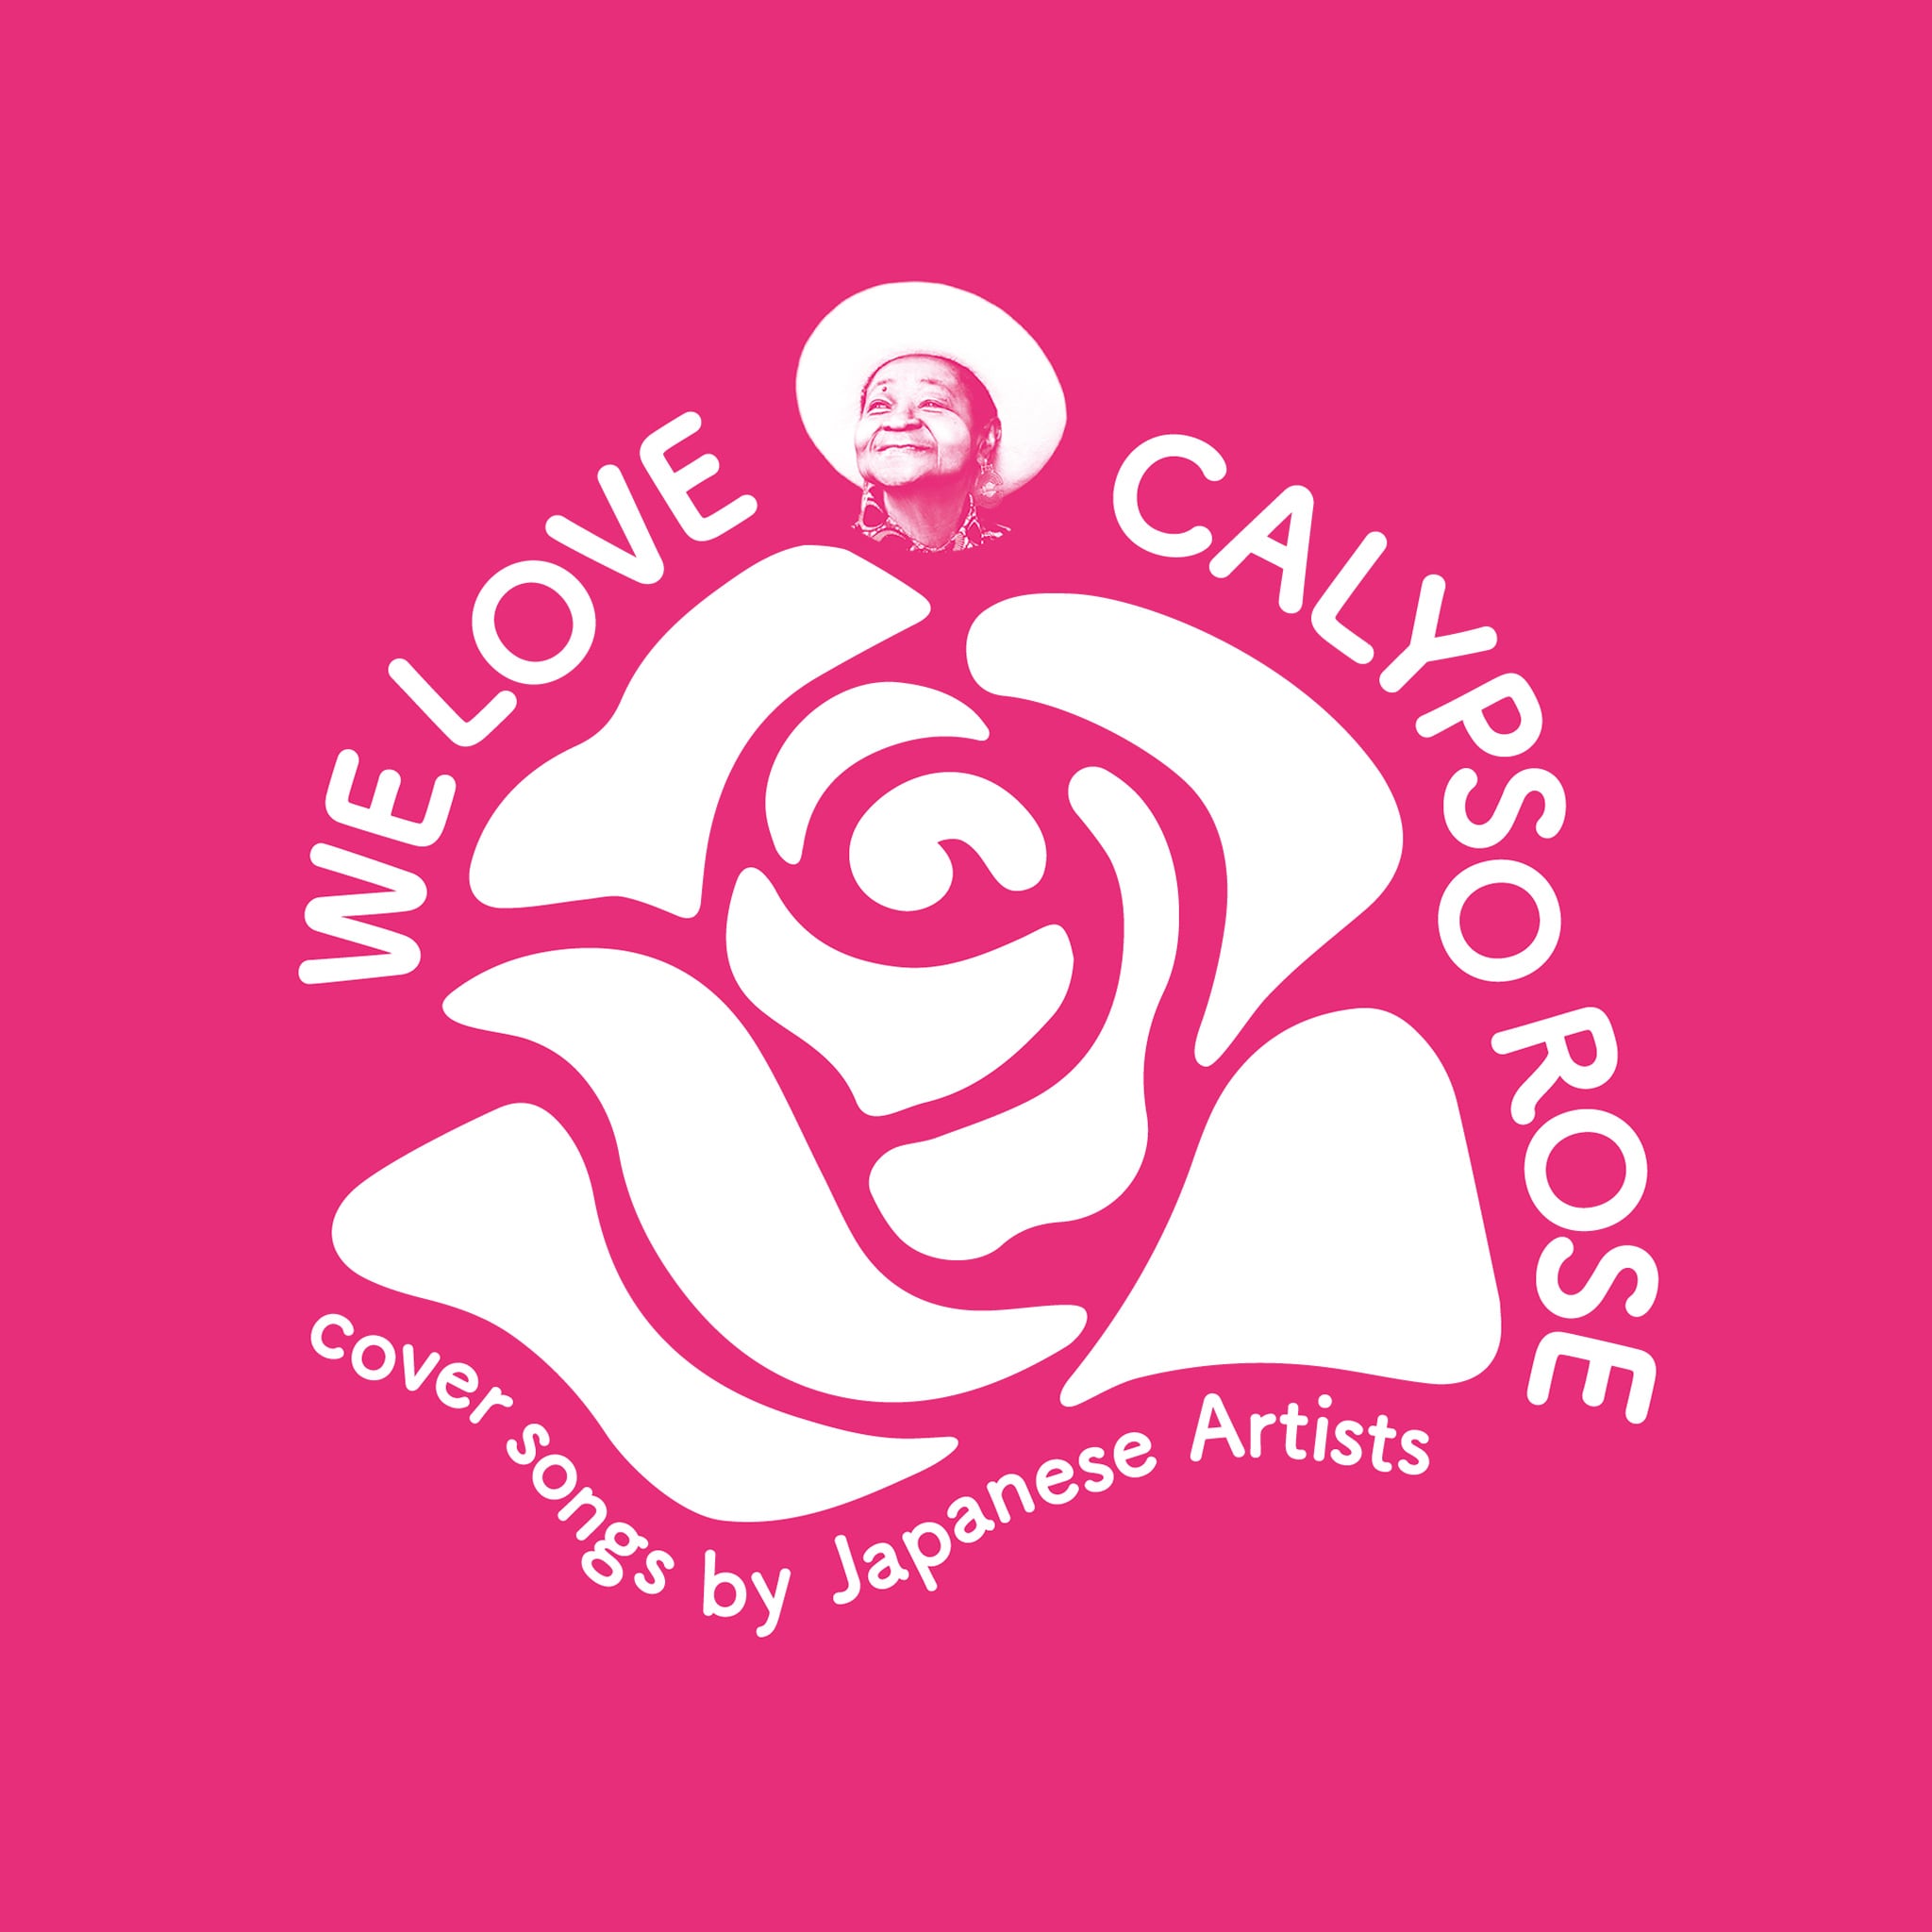 ROSE　songs　<期間限定送料無料！>　Artists』　Japanese　Online　Lime　Records　by　『WE　CD　cover　LOVE　CALYPSO　Store